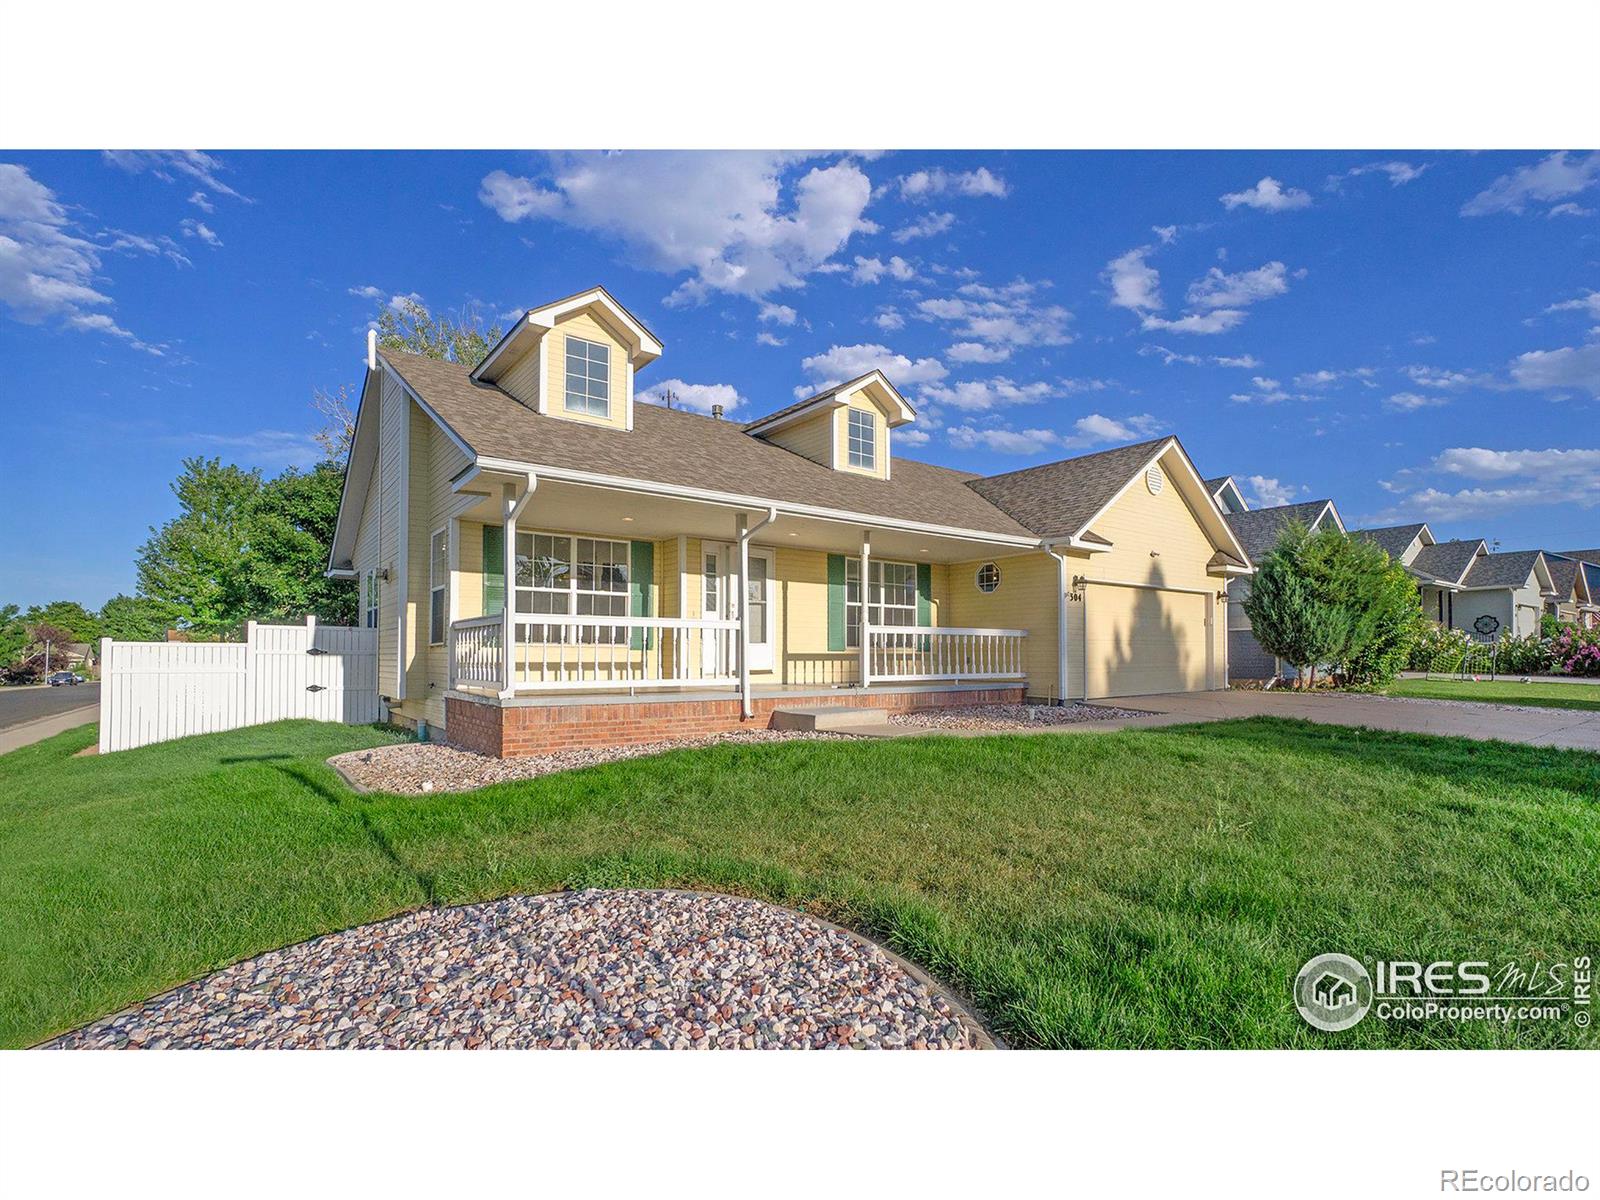 304  53rd Avenue, greeley MLS: 123456789991824 Beds: 5 Baths: 3 Price: $515,000